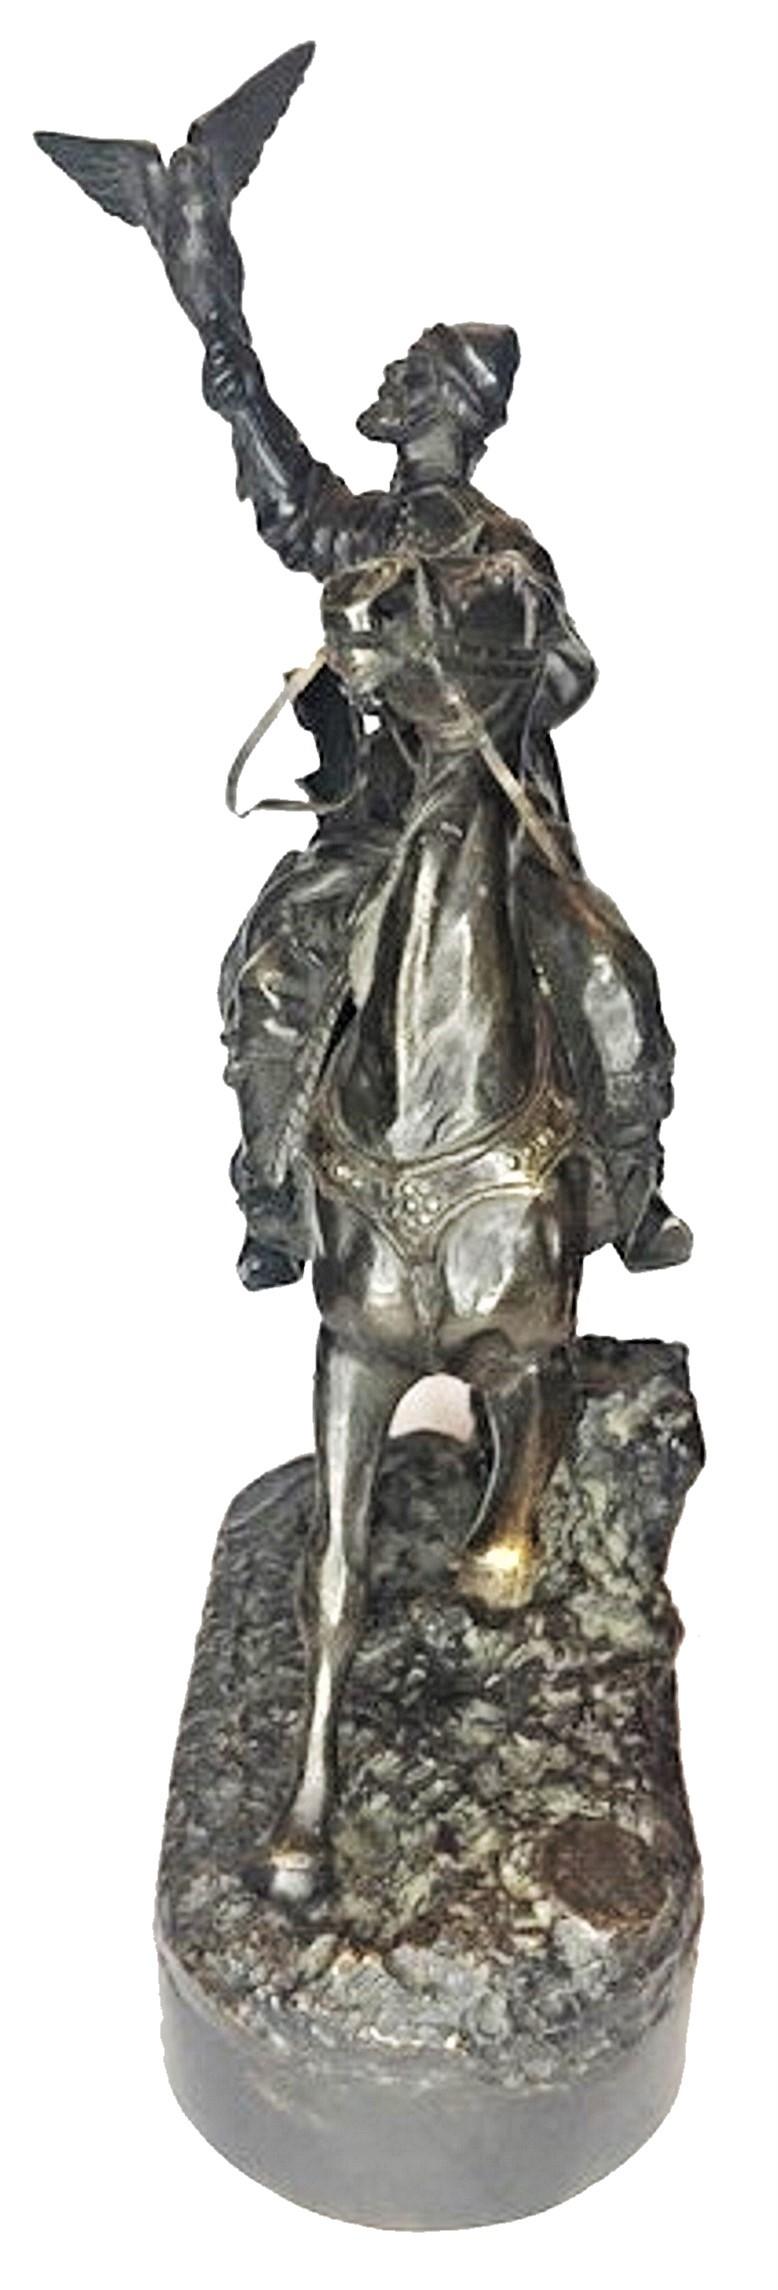 Sculpture: Tsar's Falconer.

Description: Excellent and detailed quality of the composition, very lifelike, finely detailed representation of a Tsar’s falconer, a main personage of every Tsar's grand hunting event.

Designer; Evgeny